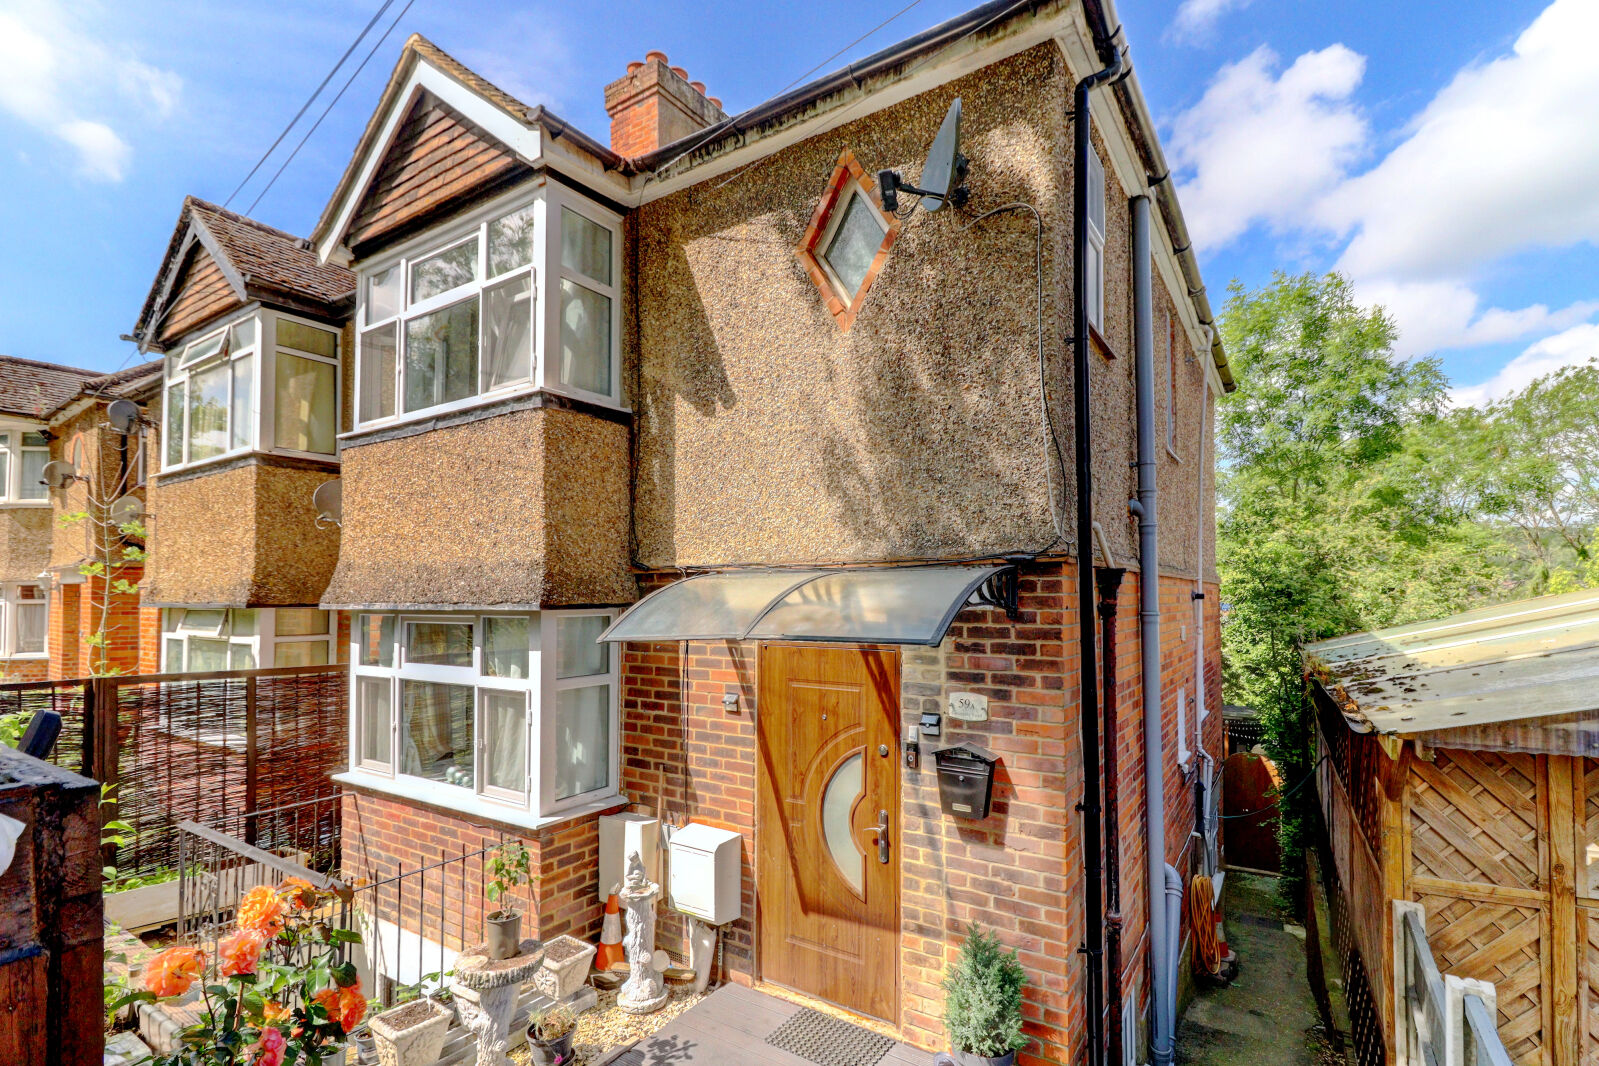 3 bedroom semi detached house for sale Coningsby Road, High Wycombe, HP13, main image